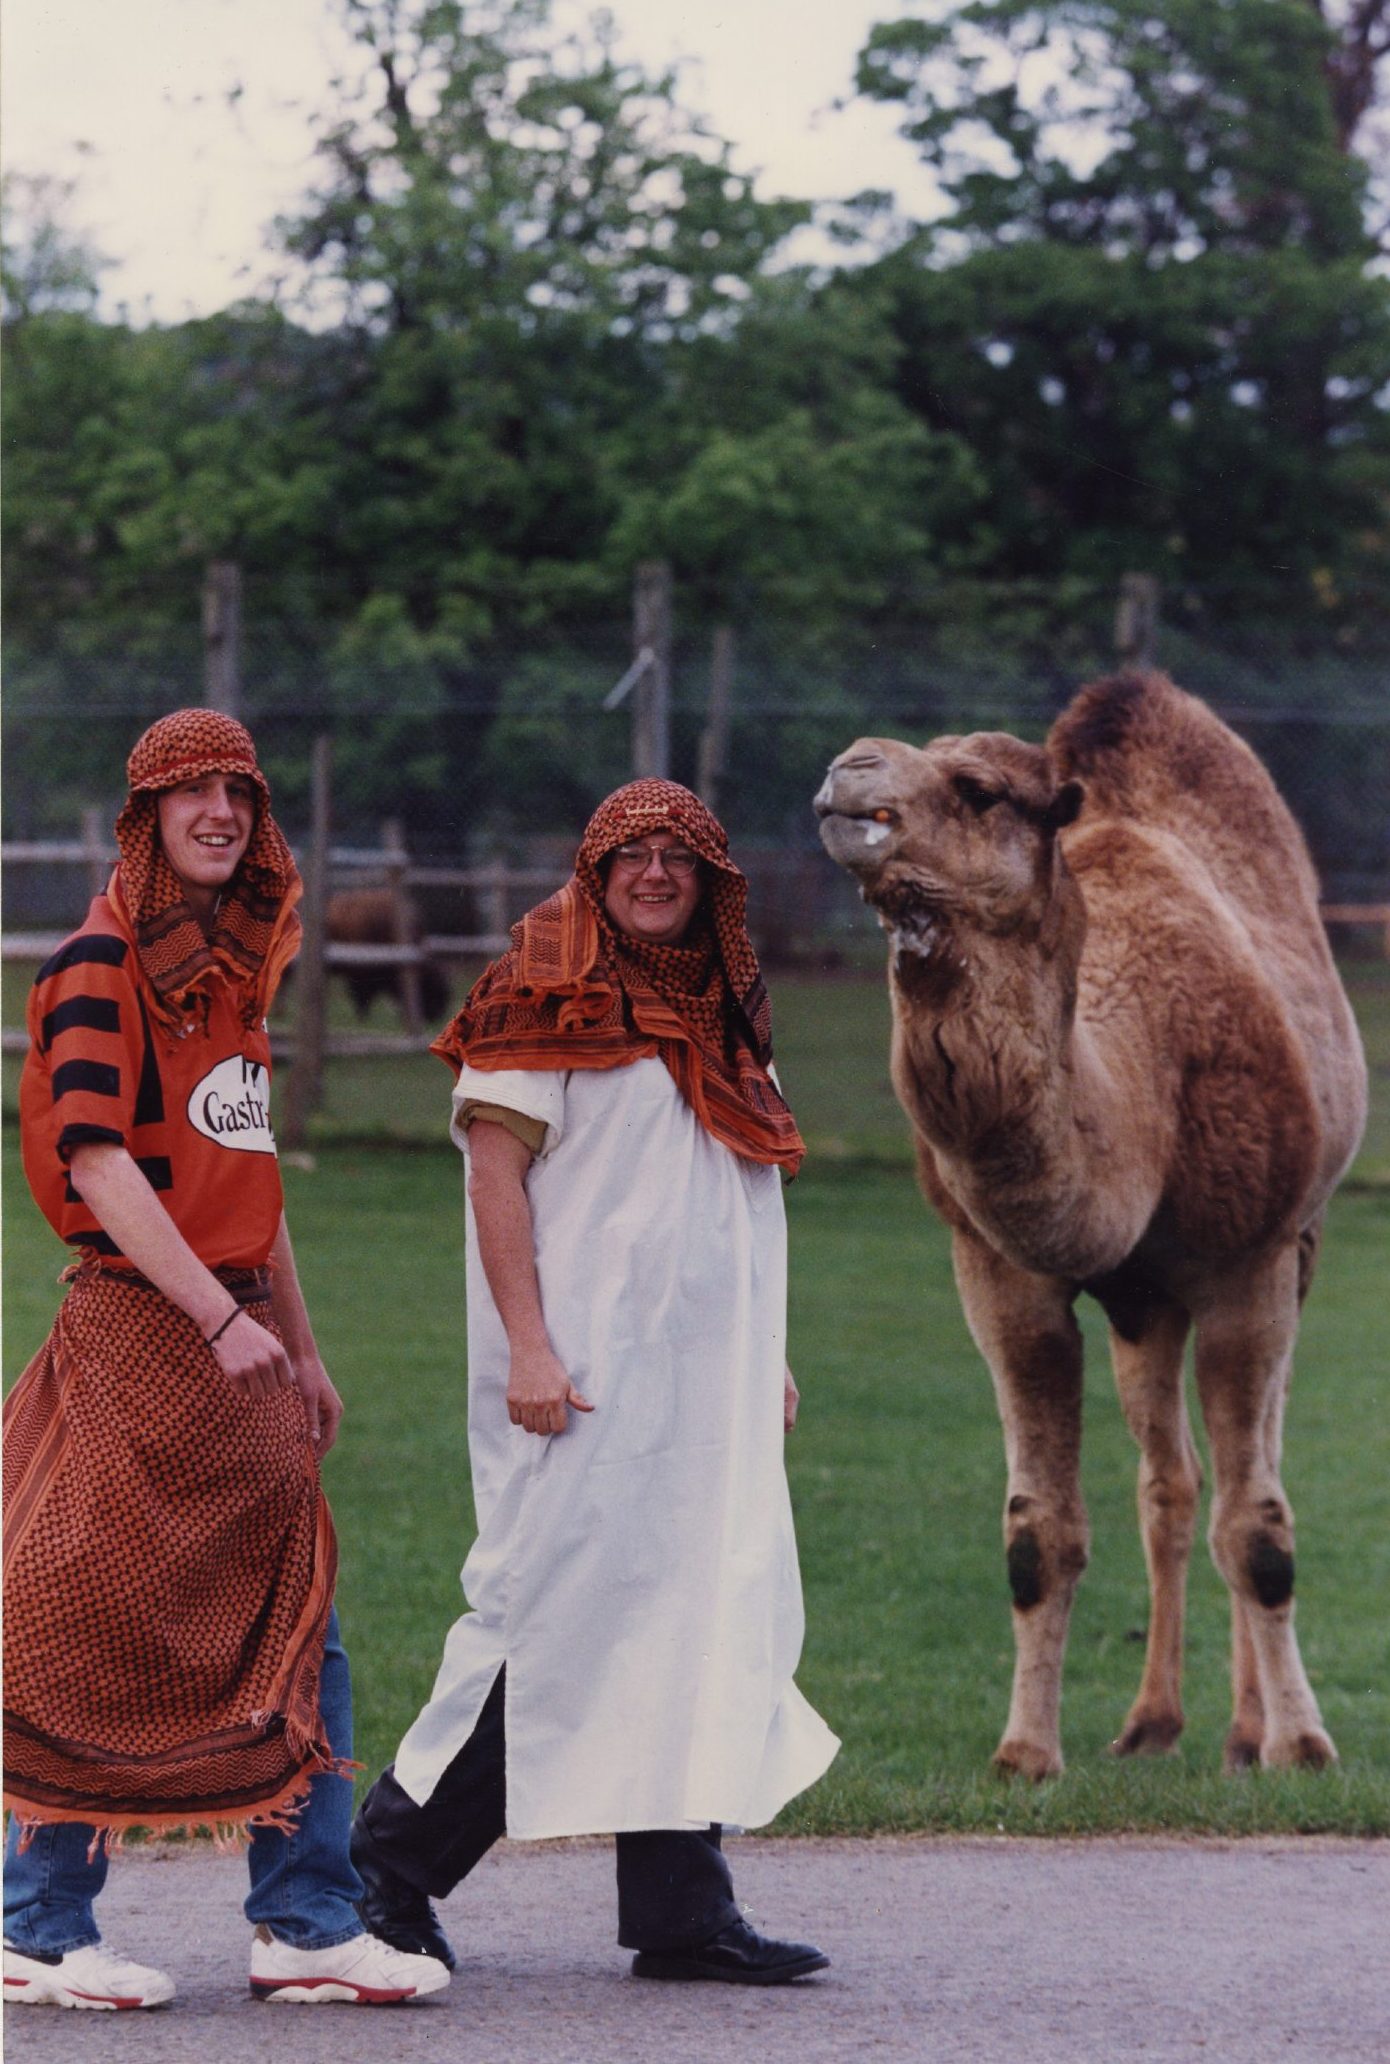 Dundee United fans dressed up and standing next to a camel. 